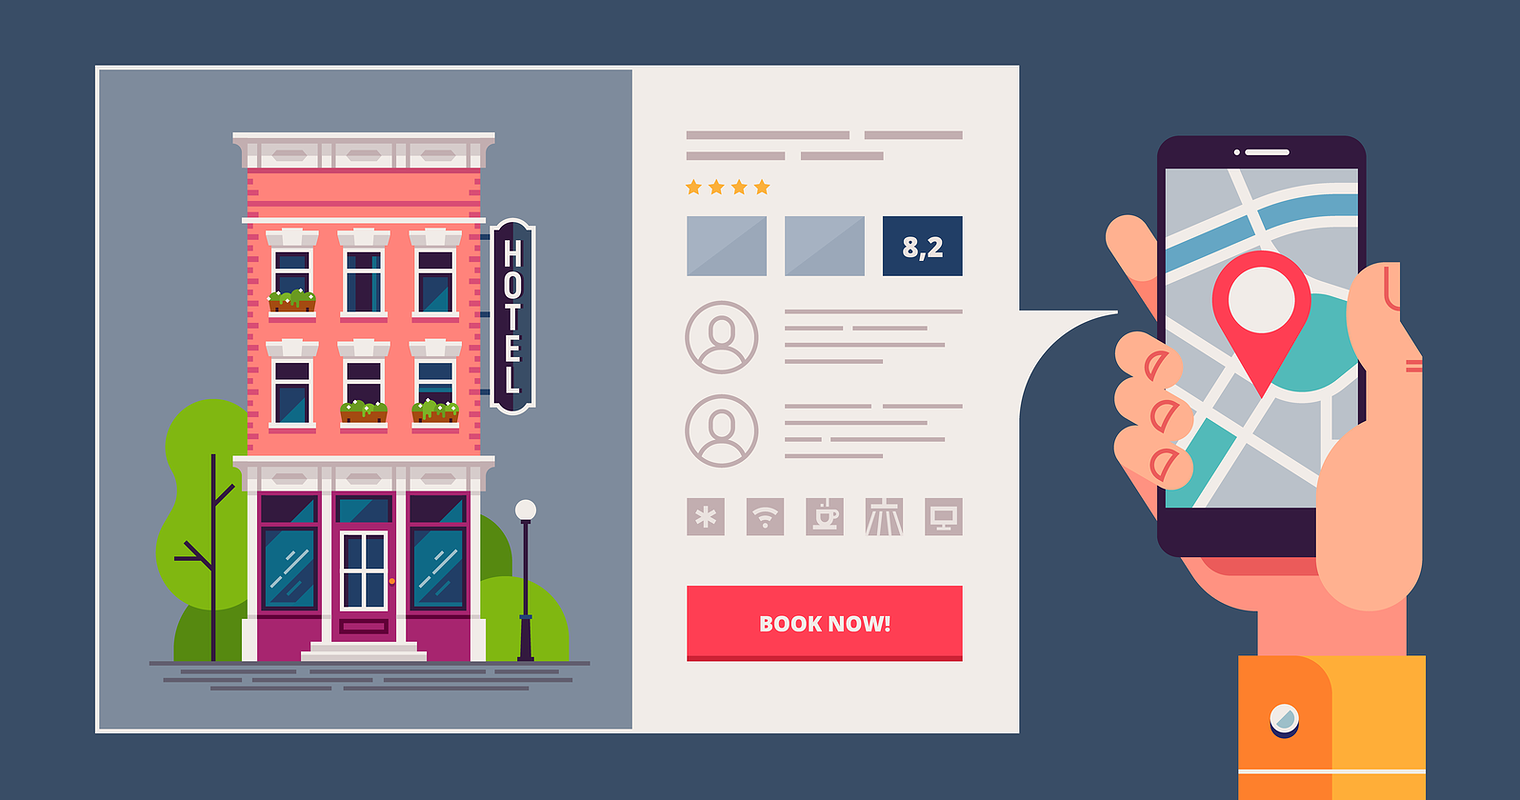 Hospitality SEO Best Practices For 2022 & Beyond